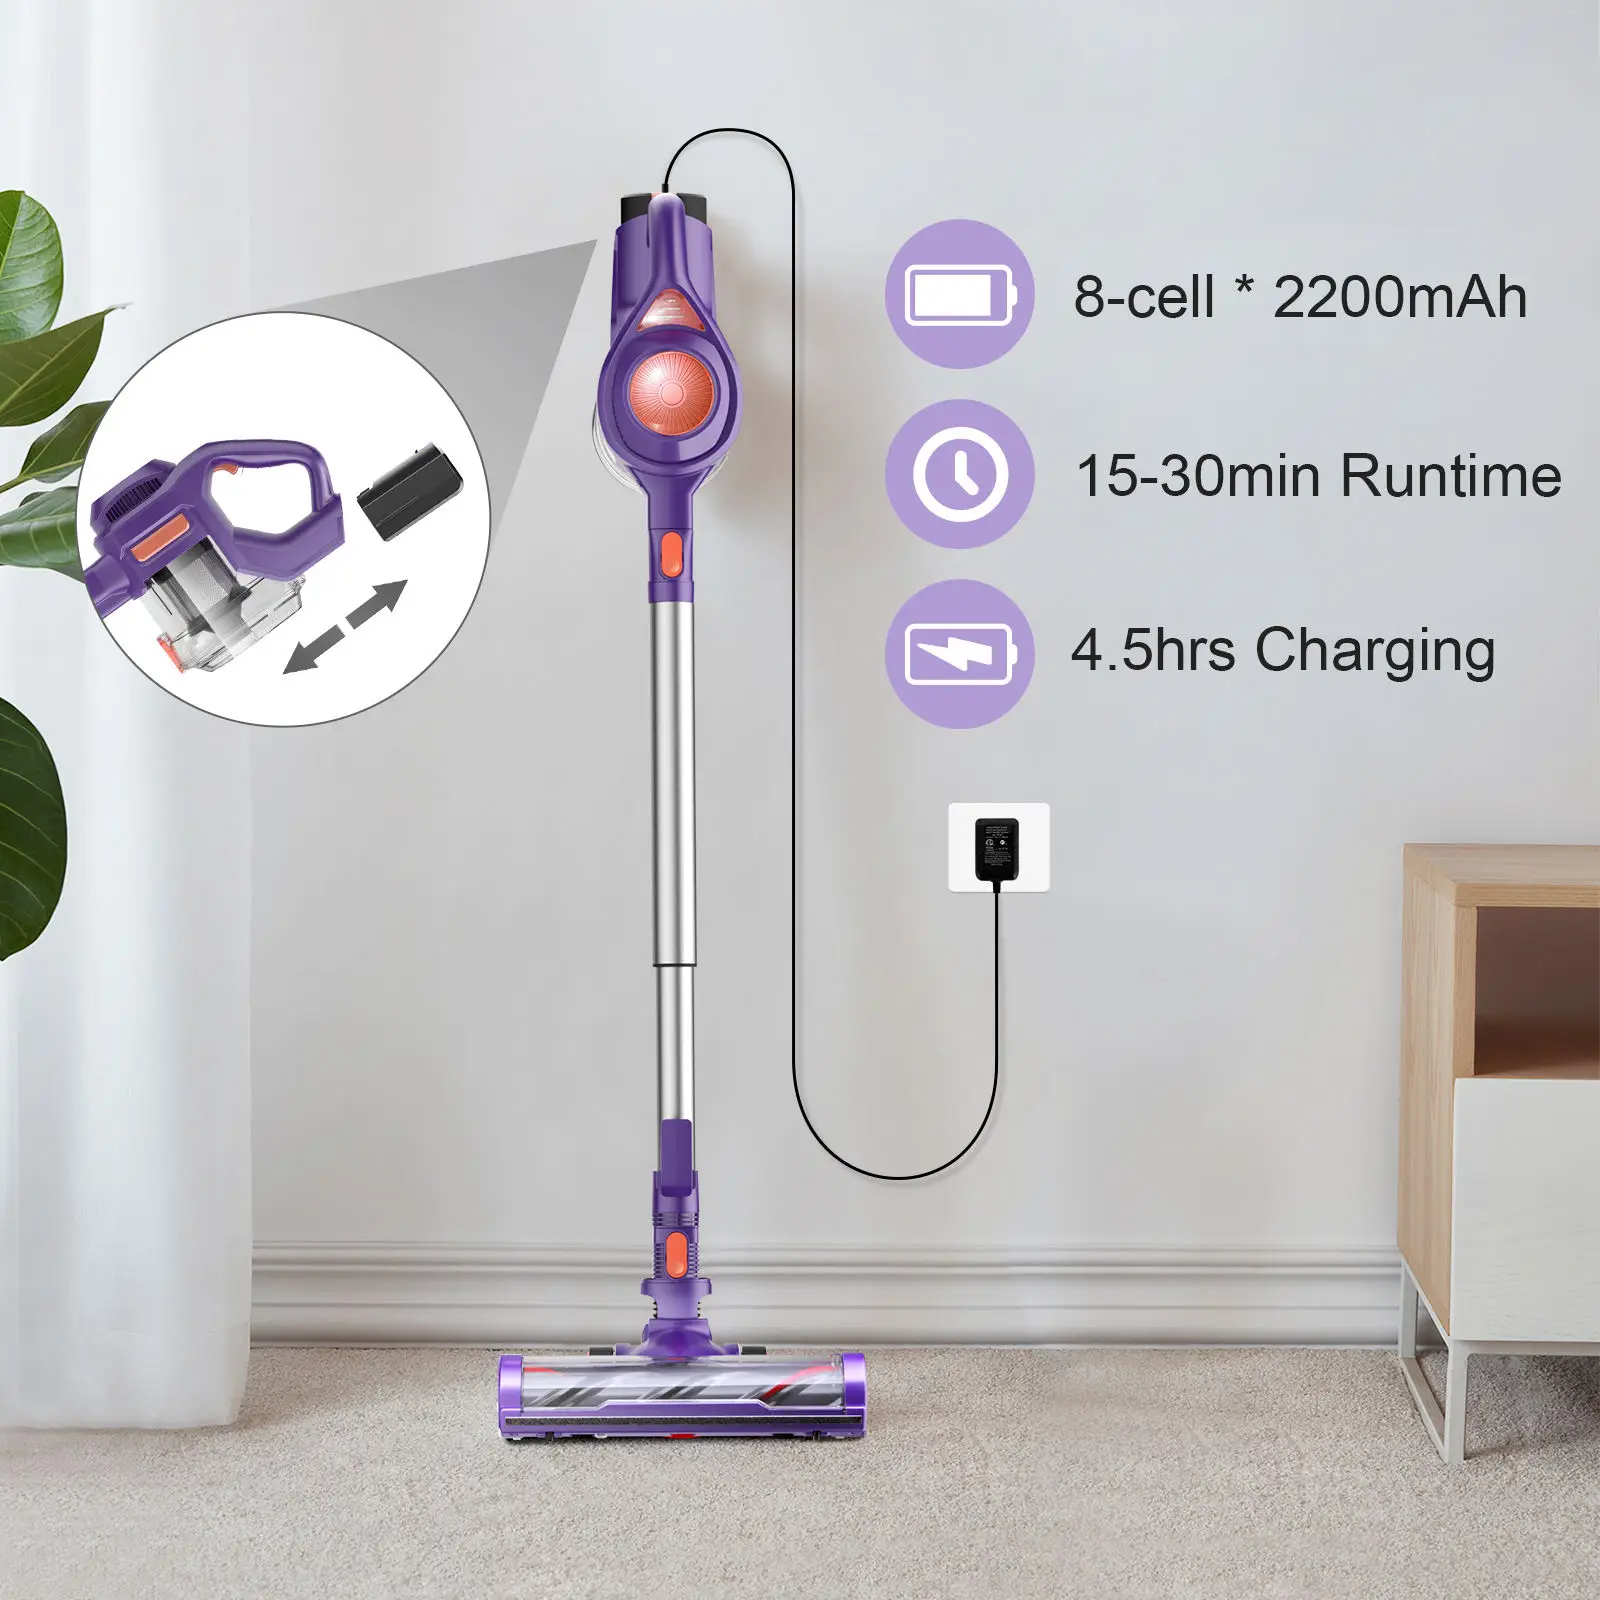 https://ae01.alicdn.com/kf/See914dbfb3ed43c0b23bf3d27320086cs/MOOSOO-Wireless-Hand-Held-Vacuum-Cleaner-Cordless-Vacuum-Cleaner-With-Touch-Screen-Low-noise-for-Hard.jpg